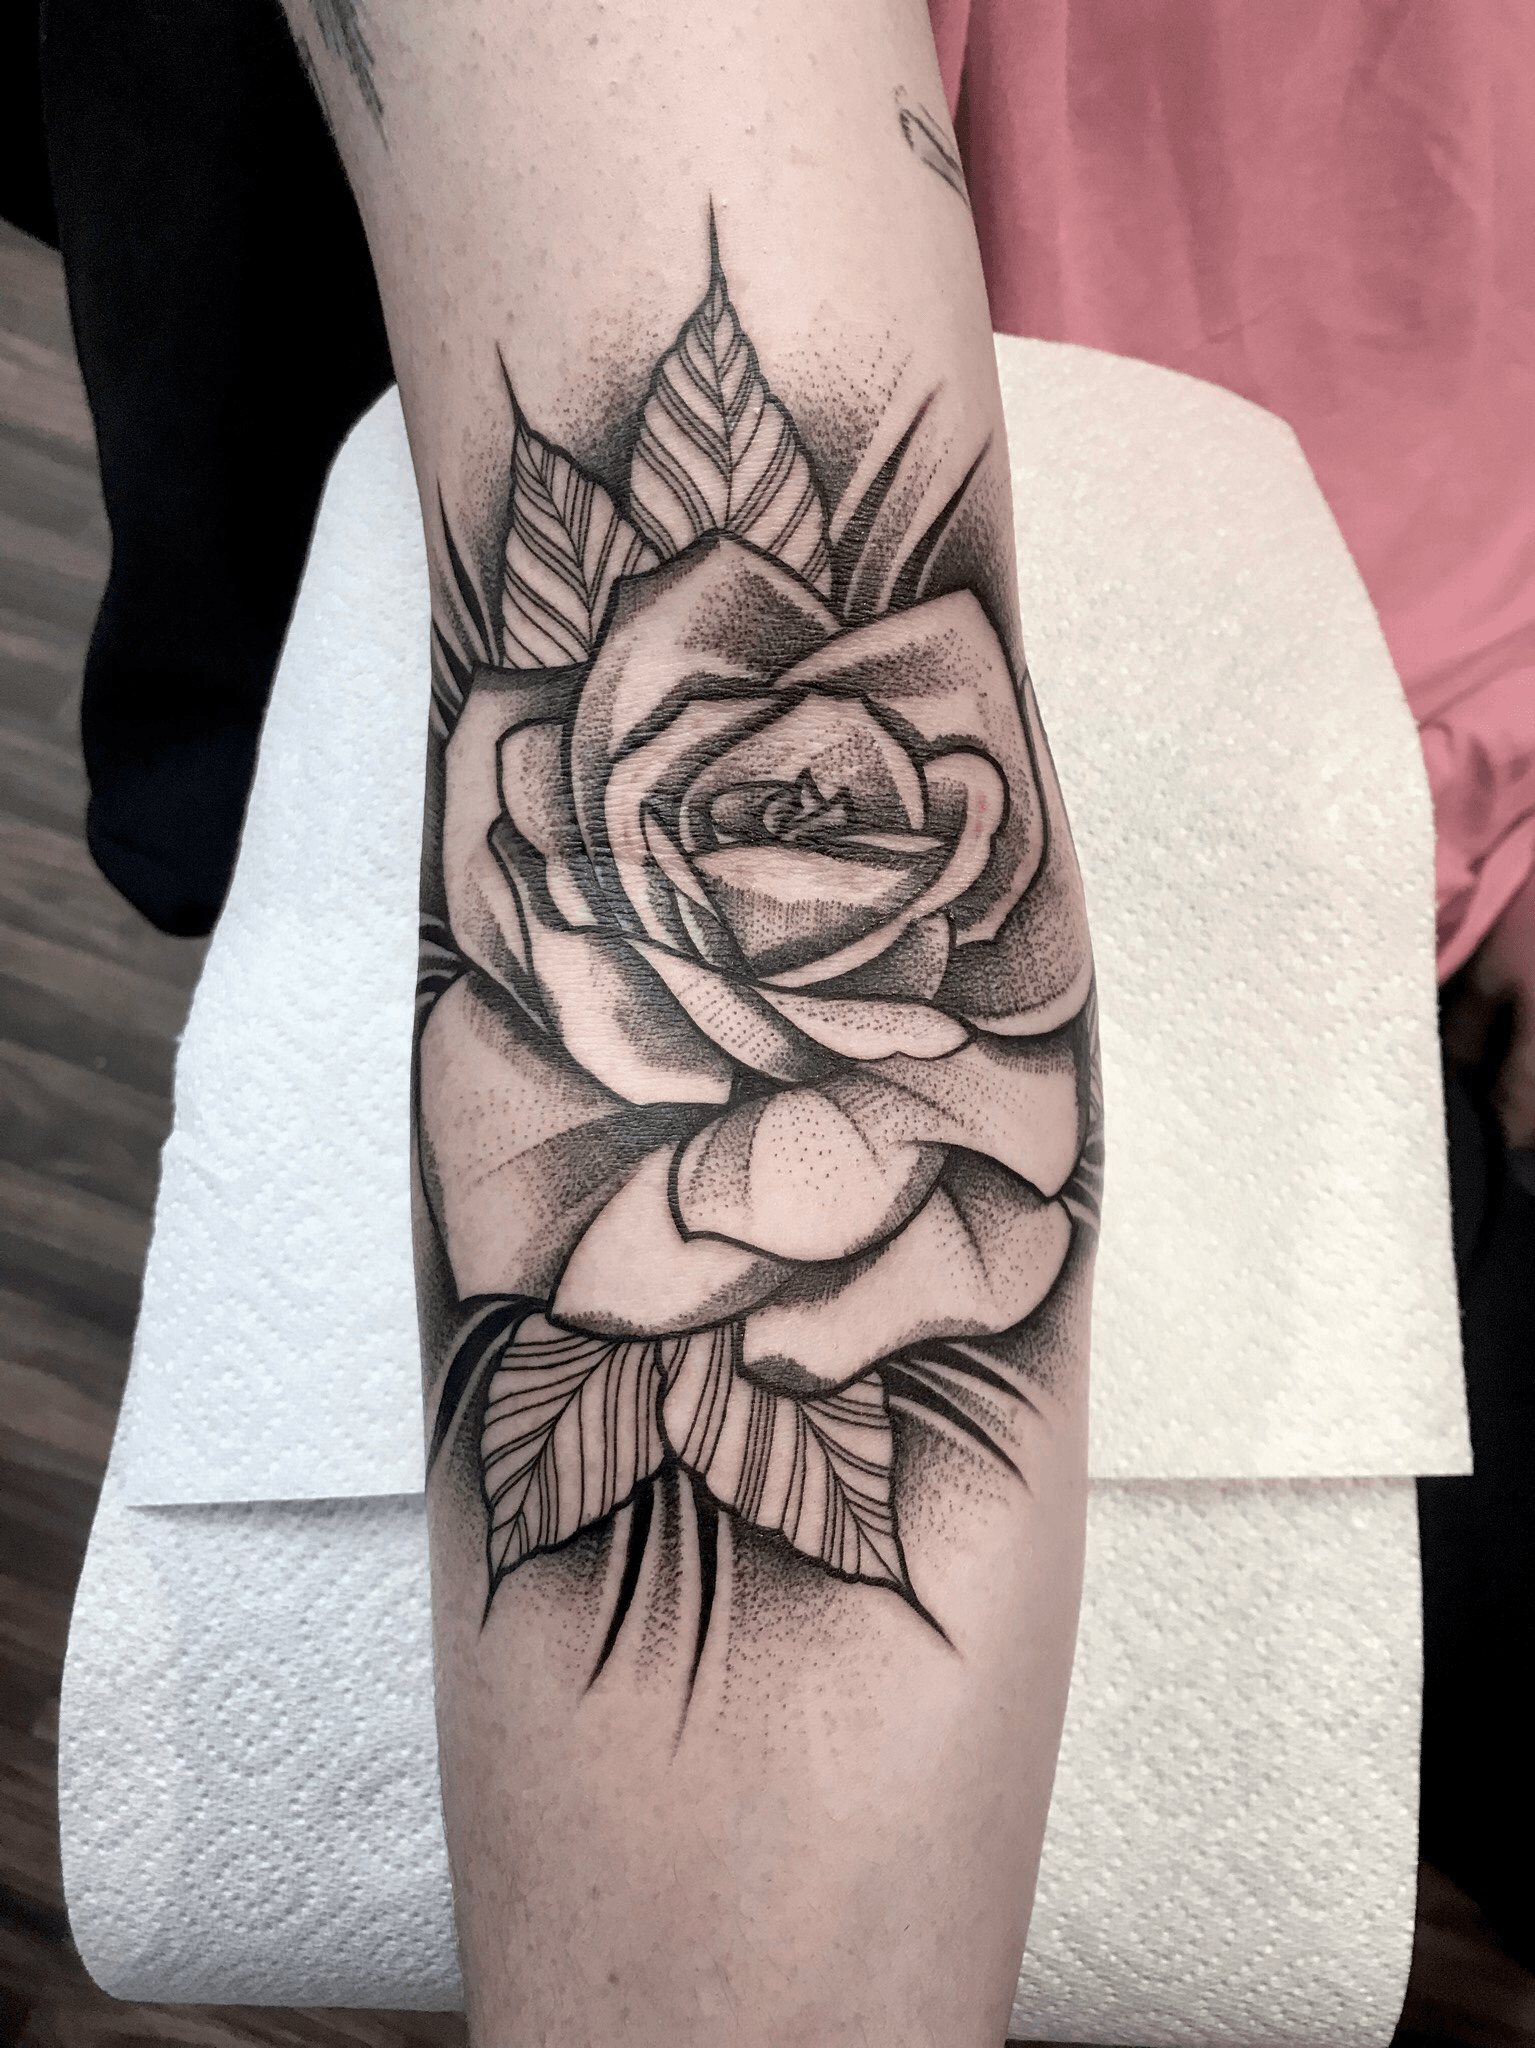 Tattoo uploaded by maddy Hoag  Bee on inner arm above elbow  Tattoodo